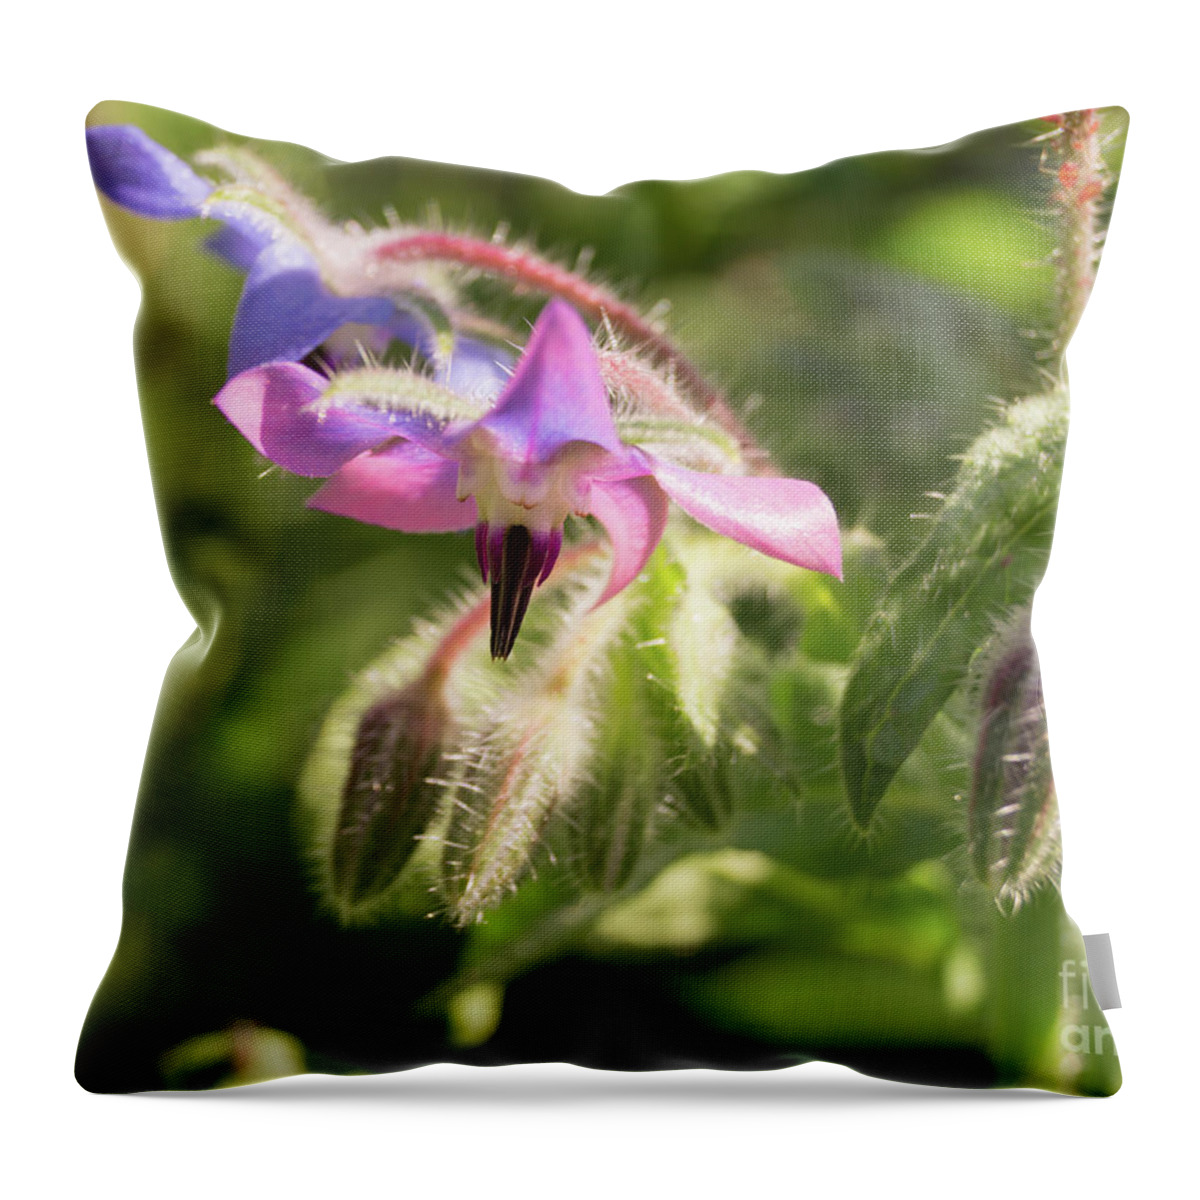 Borage Throw Pillow featuring the photograph Borage Flowers by MM Anderson